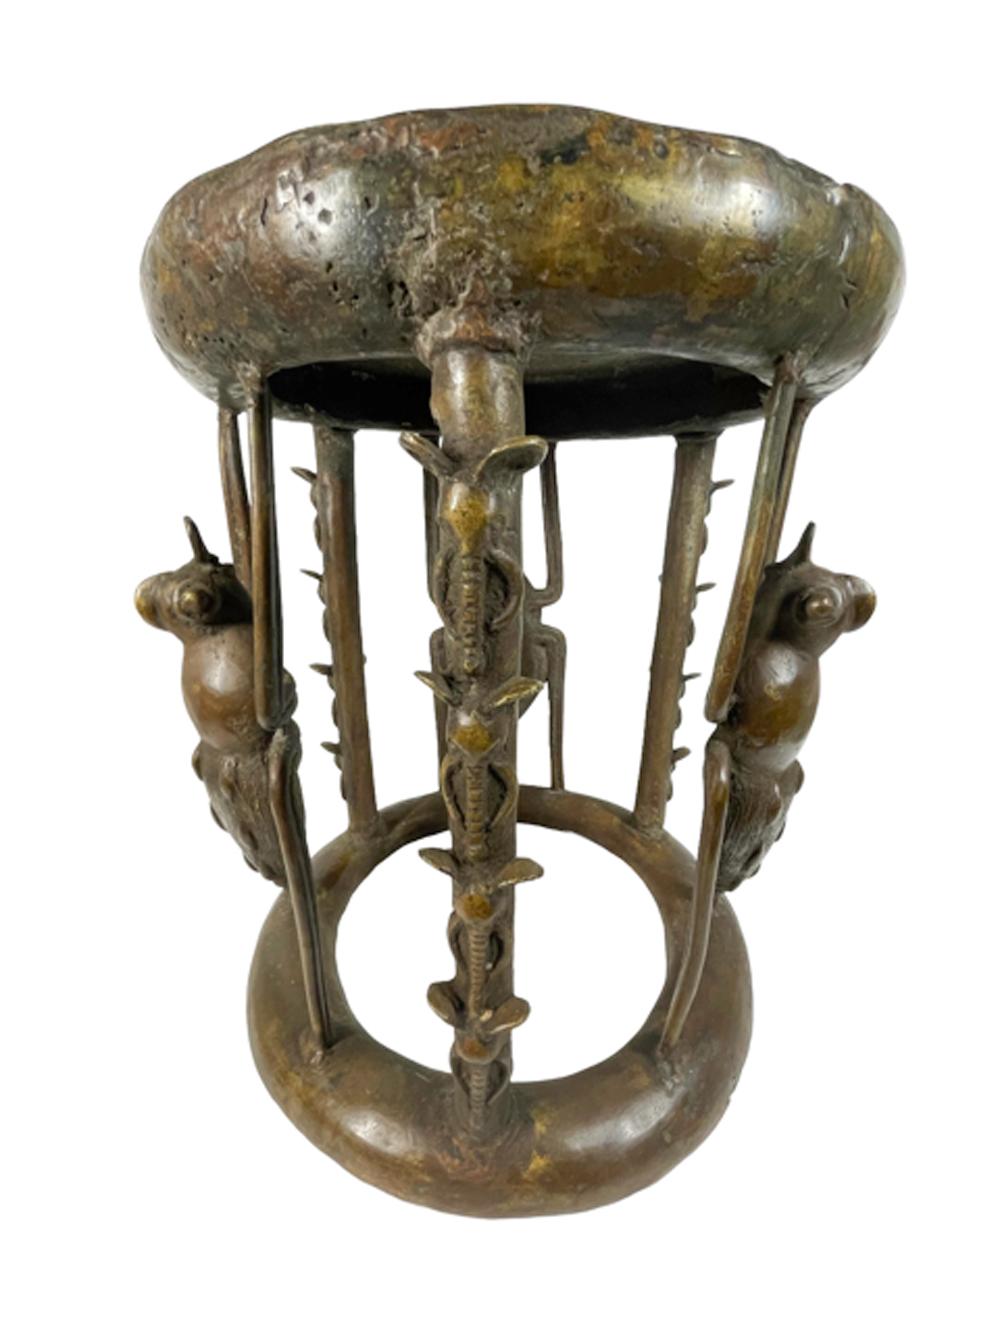 Bronze stool of cylindrical form with a cushion-form top on six supports of alternating posts with elephant heads between large outstretched beetles all rising from a convex circular foot. The top decorated with concentric circles of various